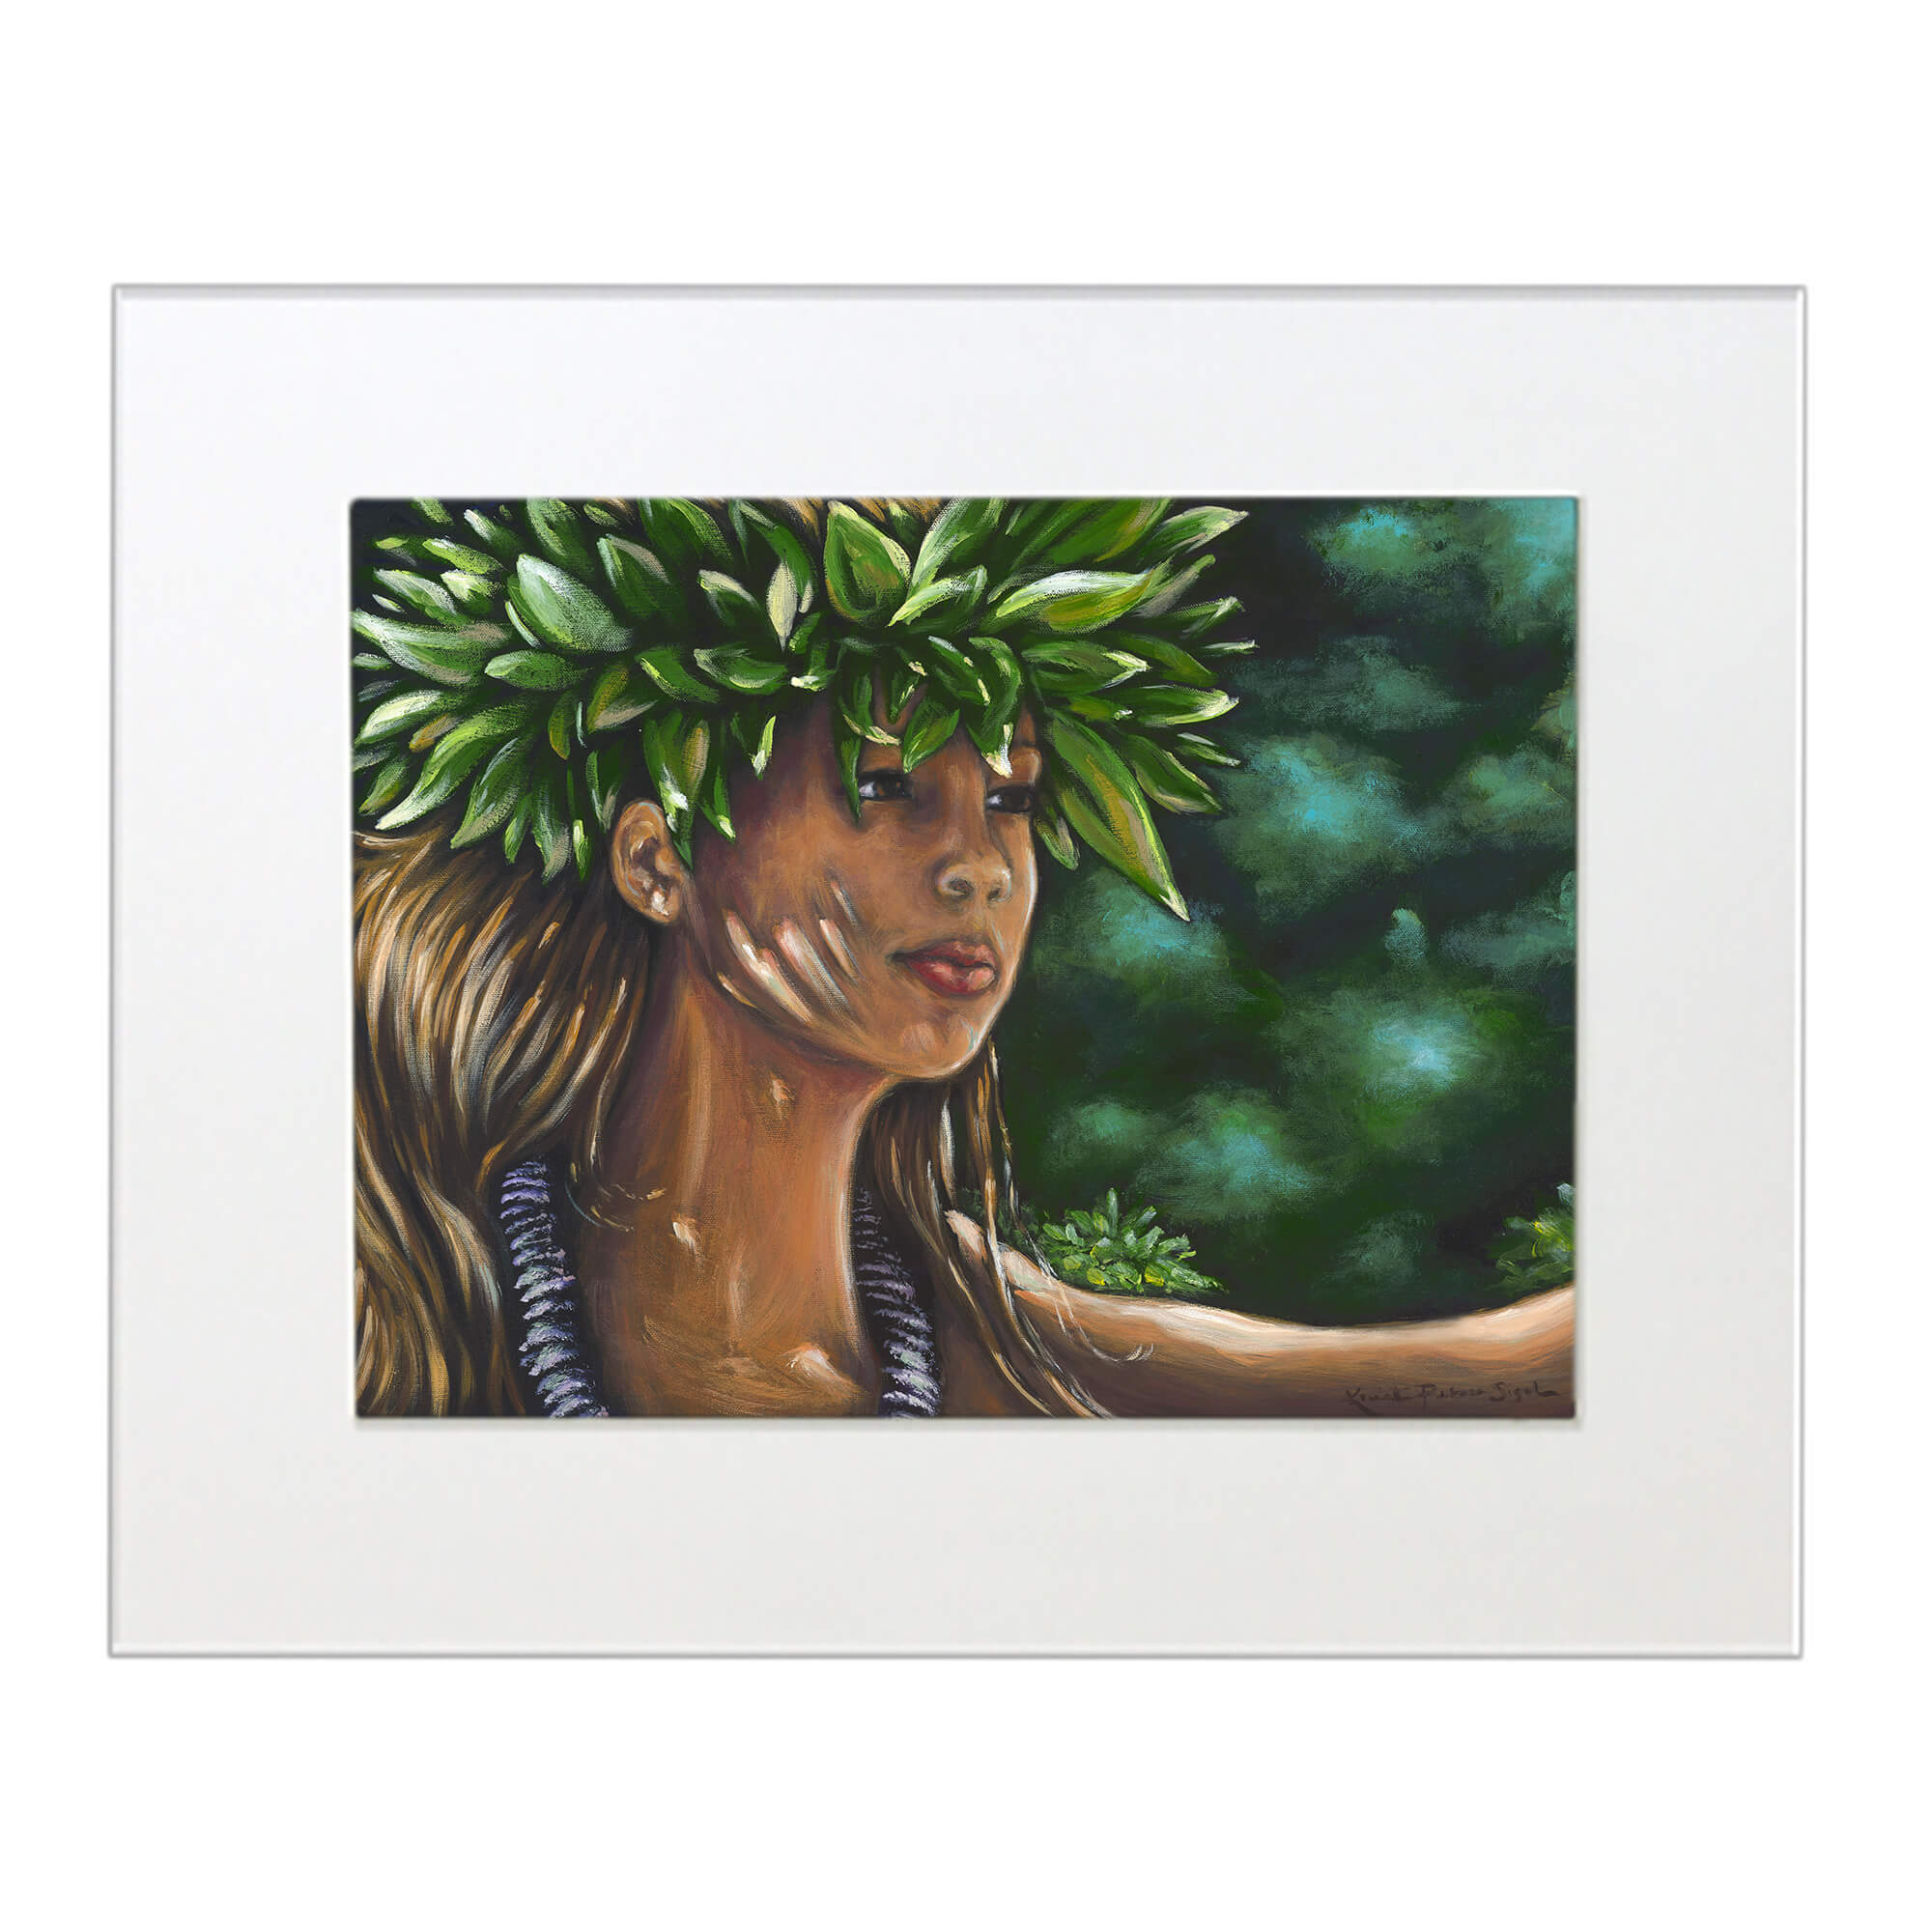 Matted art print featuring a woman with tanned skin by hawaii artist Kristi Petosa